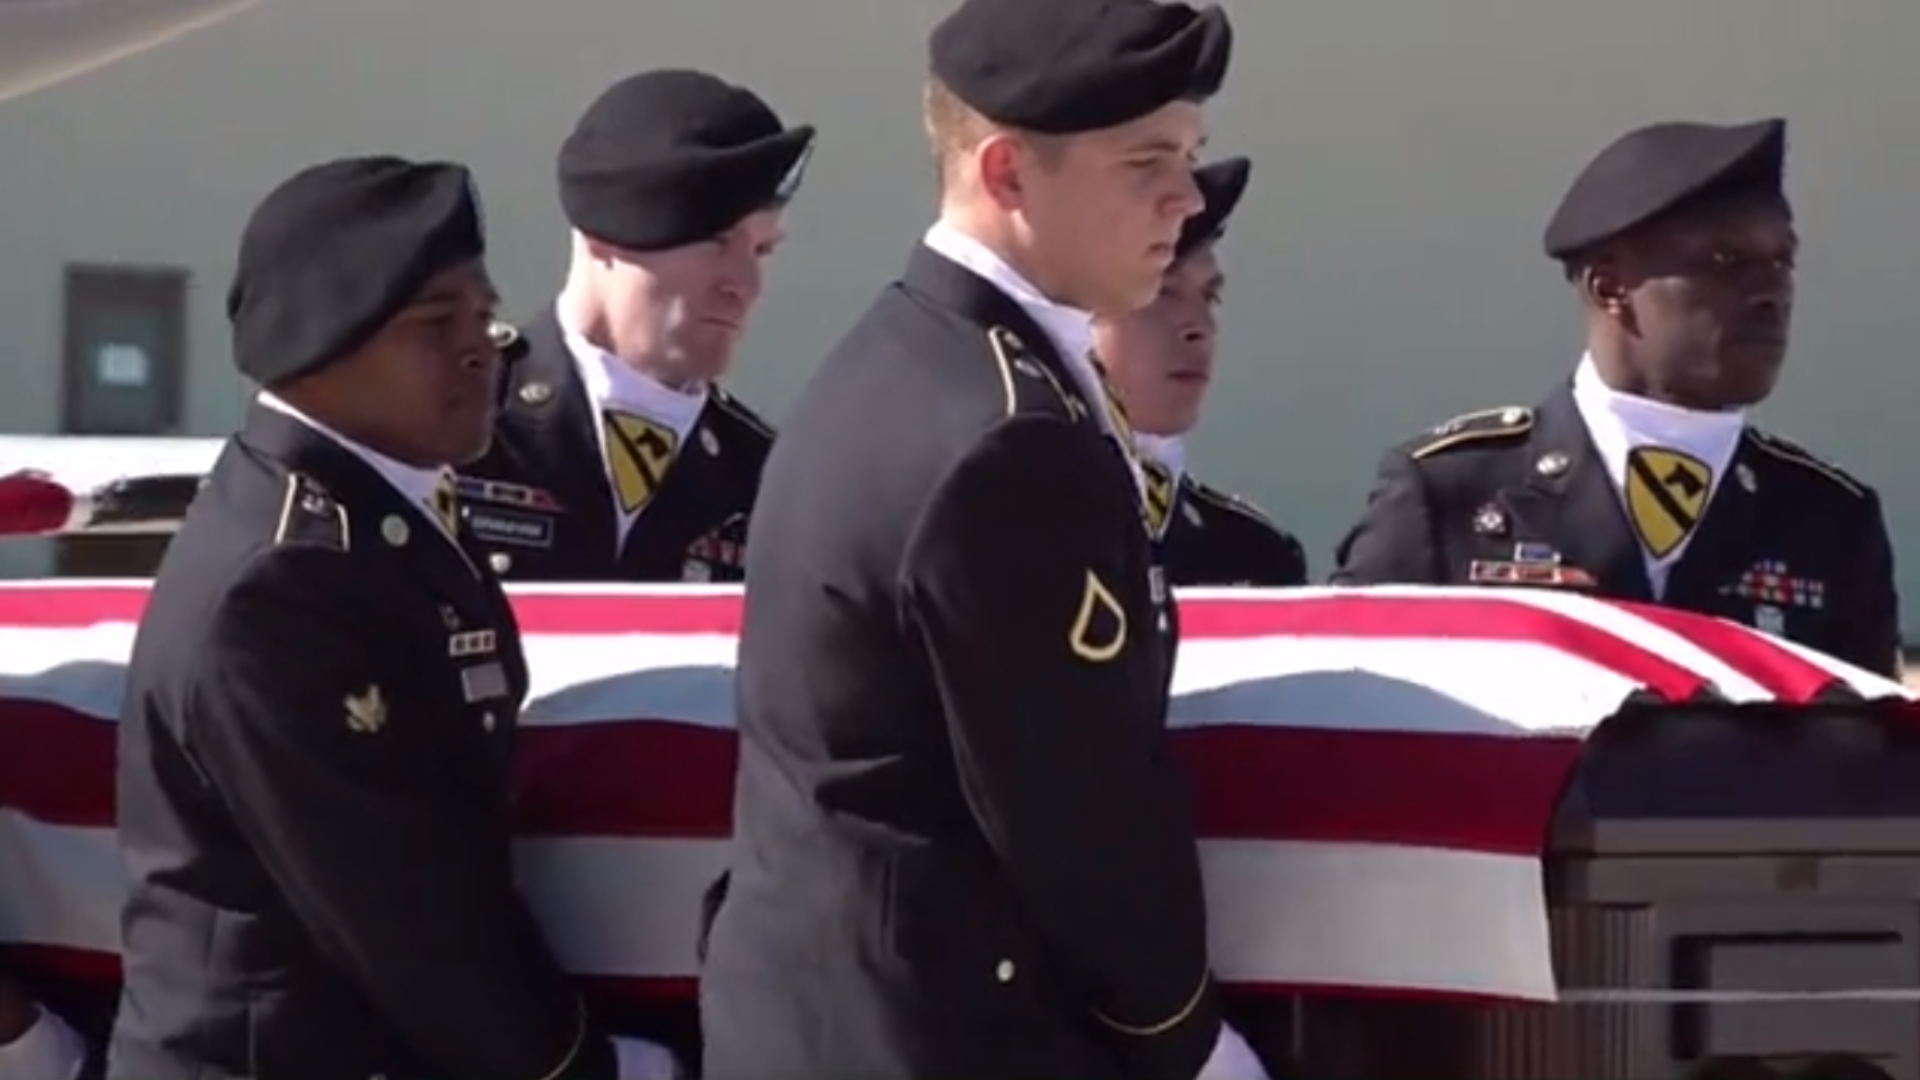 Fort Hood held a dignified transfer ceremony for 33-year-old Chief Warrant Officer 2 David C. Knadle, one of two soldiers killed in a helicopter crash overseas.